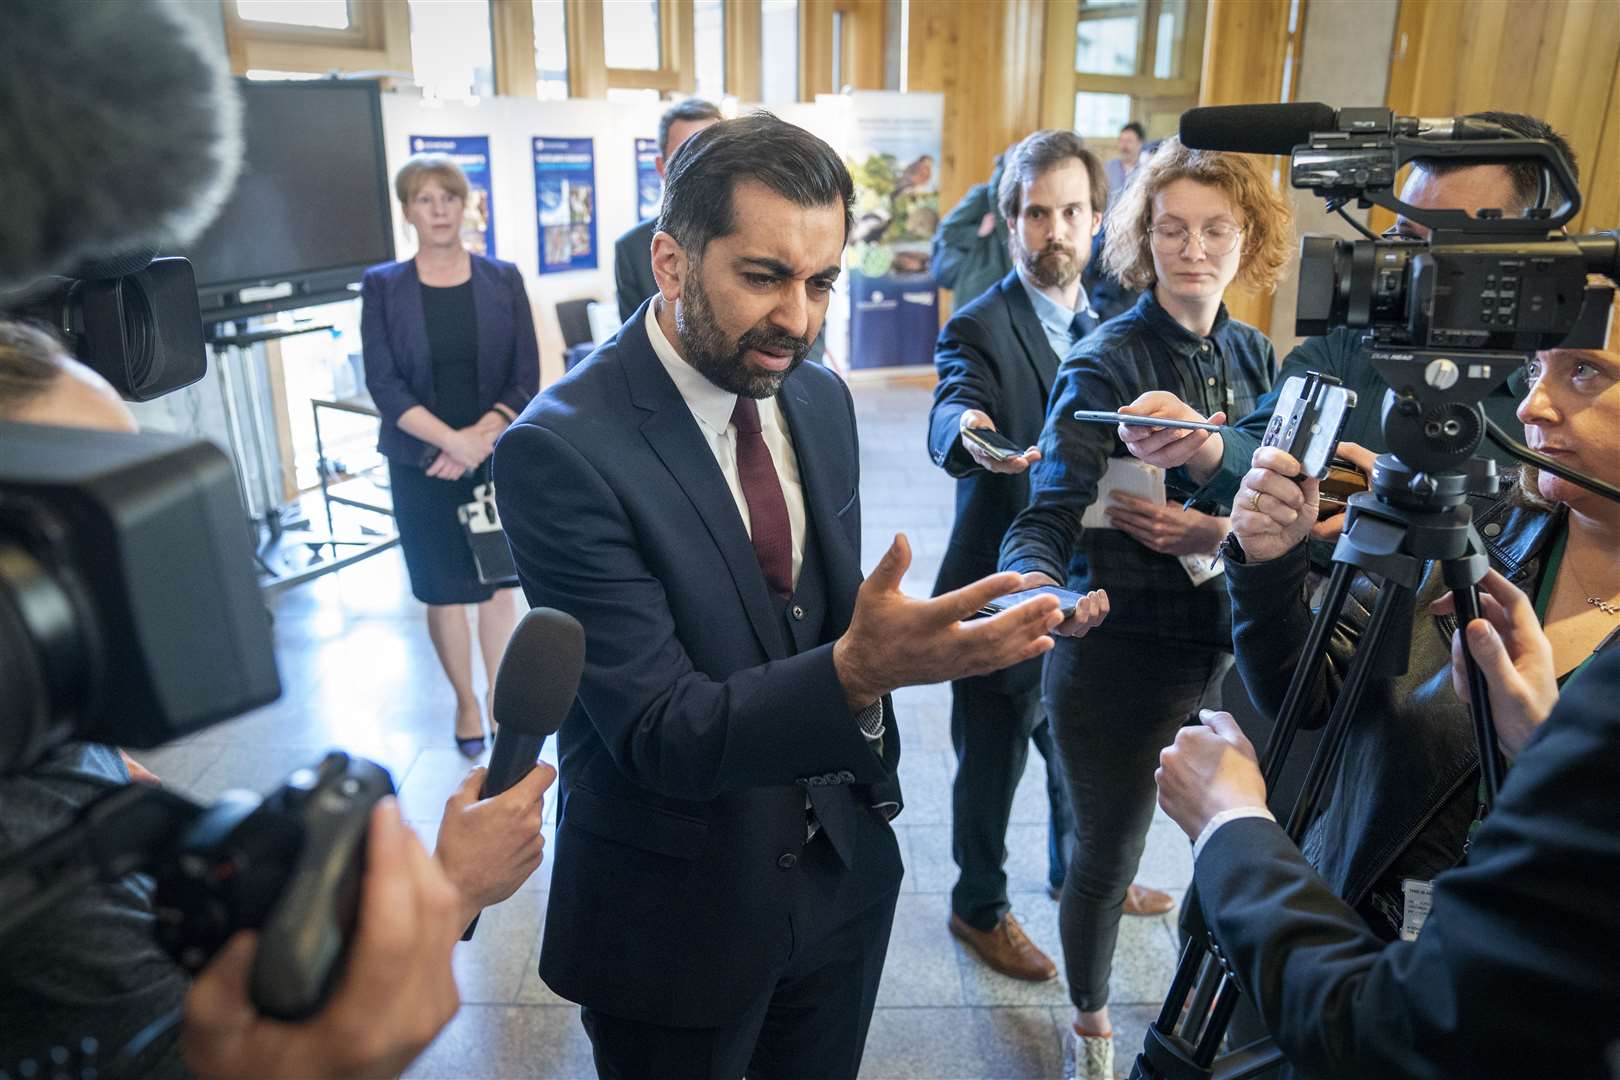 First Minister Humza Yousaf speaks to the media after delivering a statement on ‘Our Priorities for Scotland’, in the main chamber of the Scottish Parliament (Jane Barlow/PA)